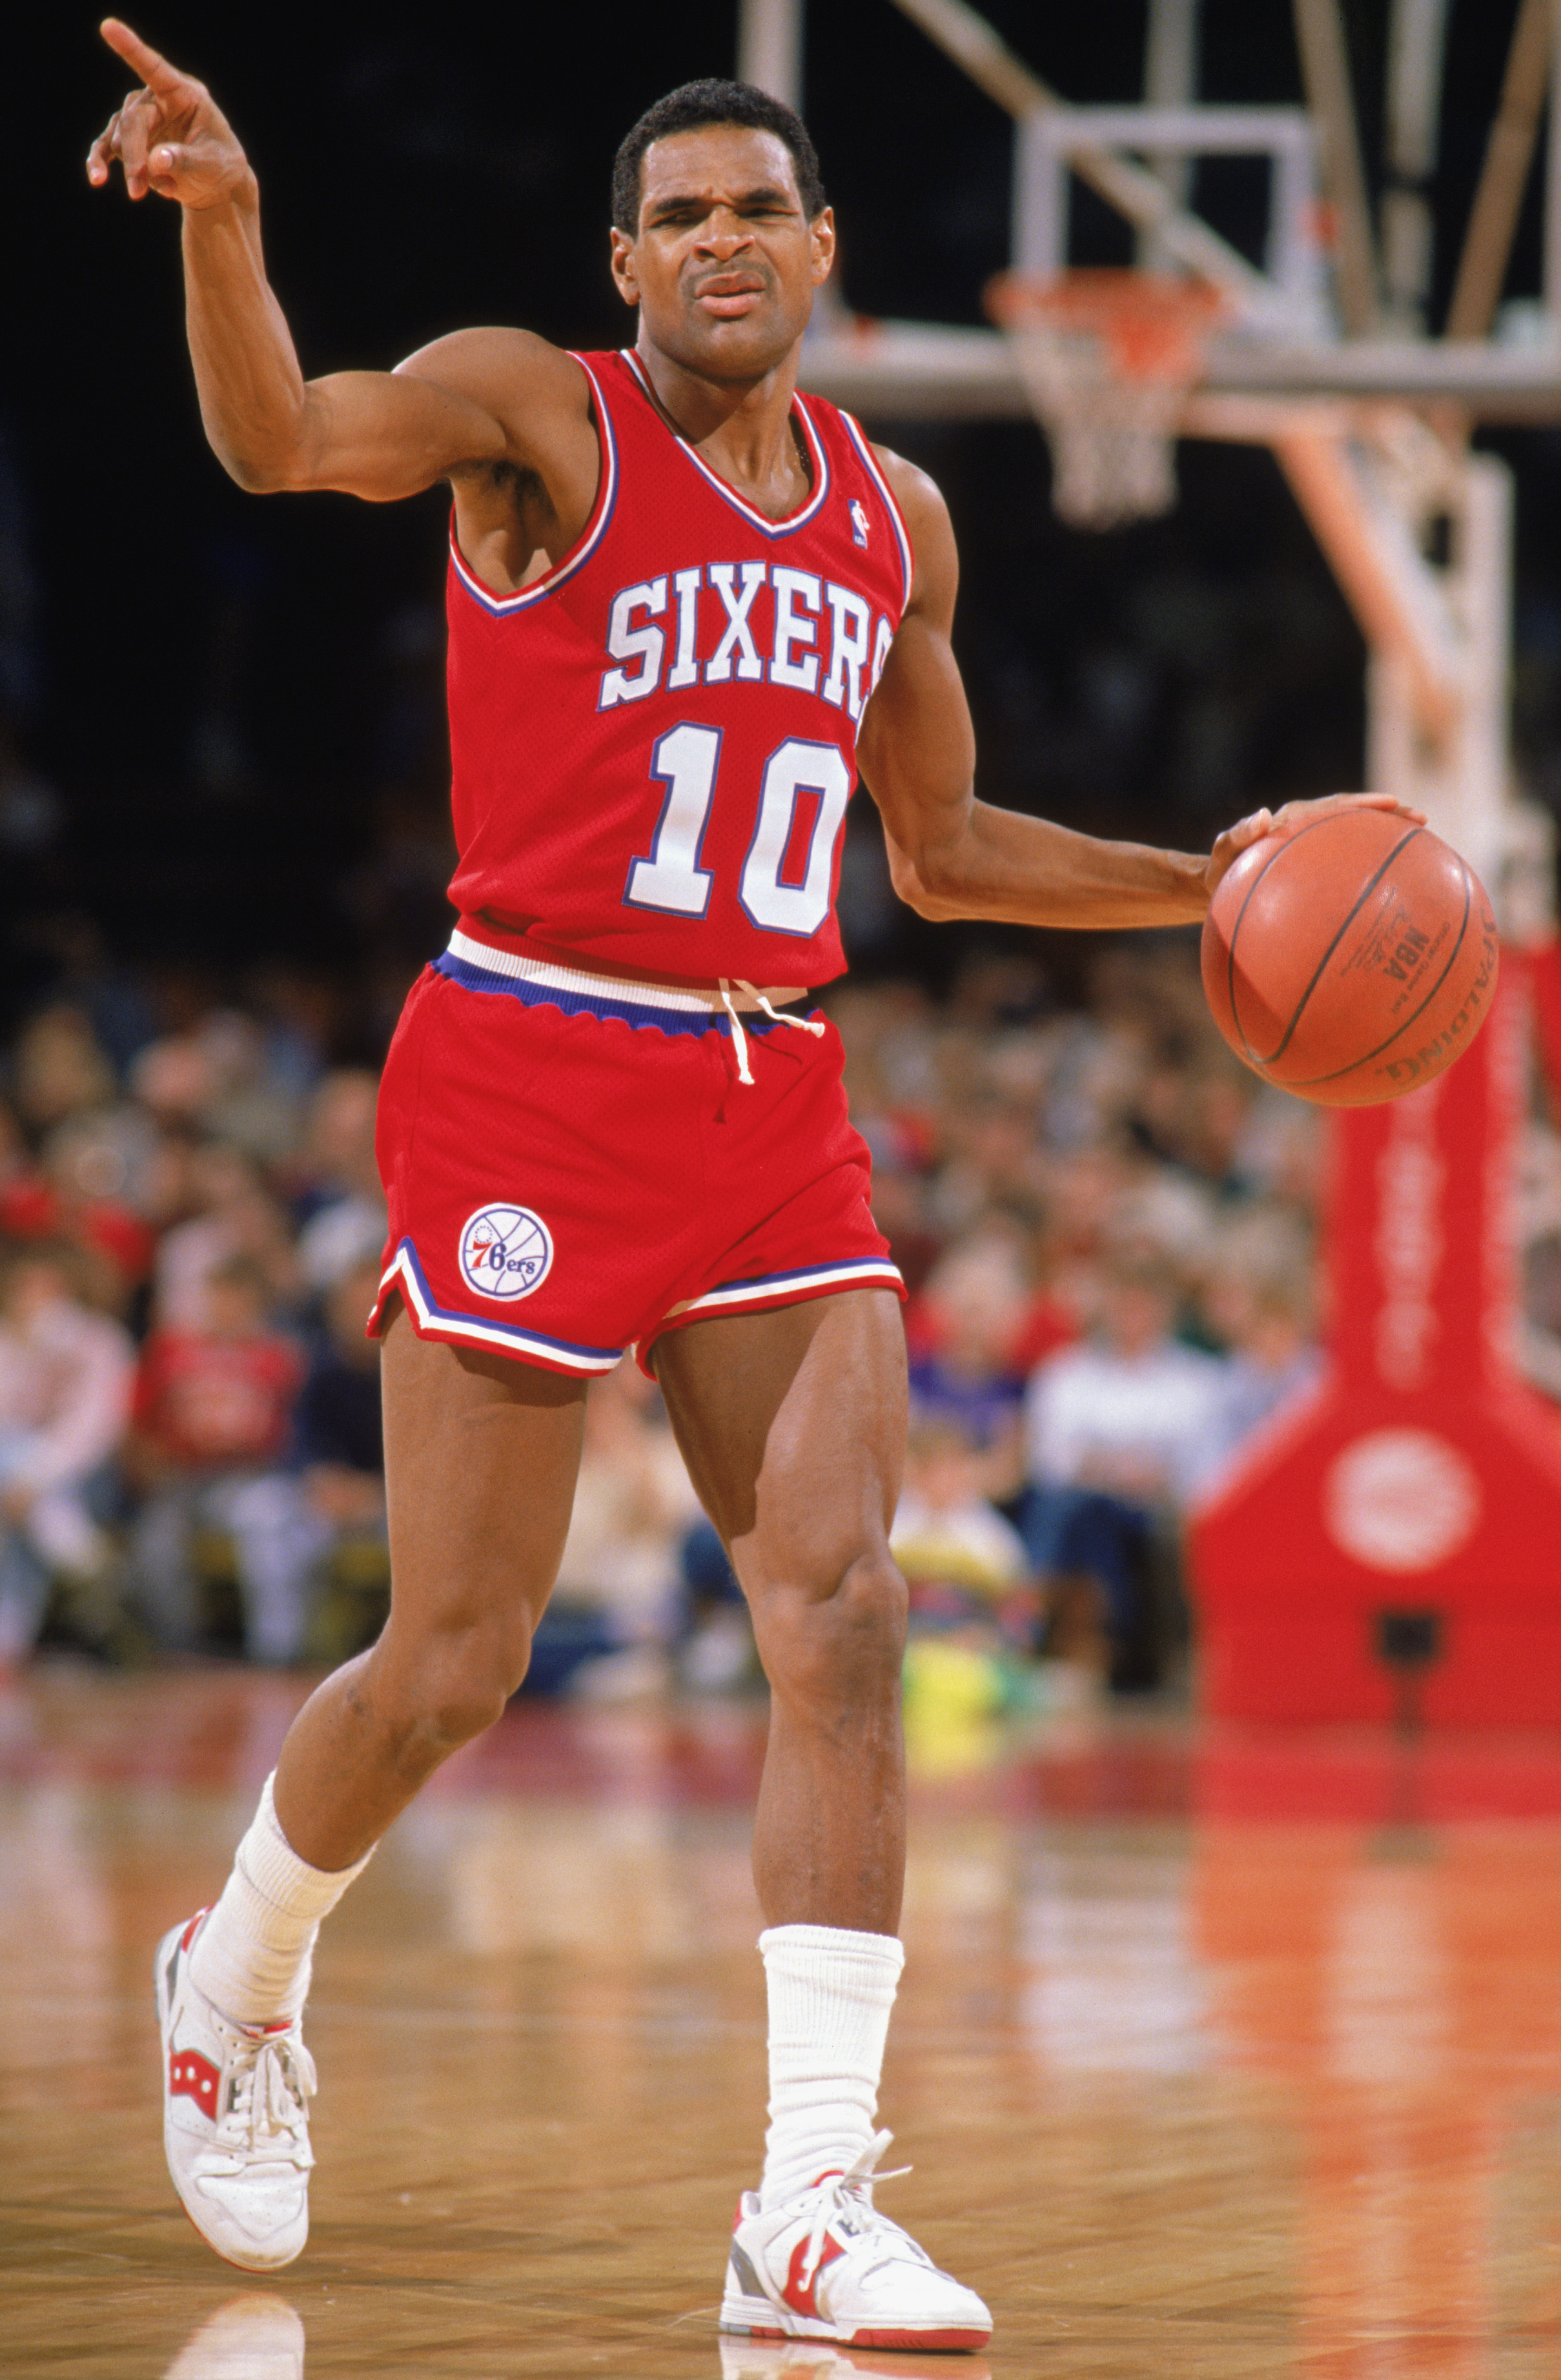 Philadelphia 76ers' Maurice Cheeks #10 makes a jumpshot against the New  York Nets during the playoffs at Meadowlands Arena circa 19…